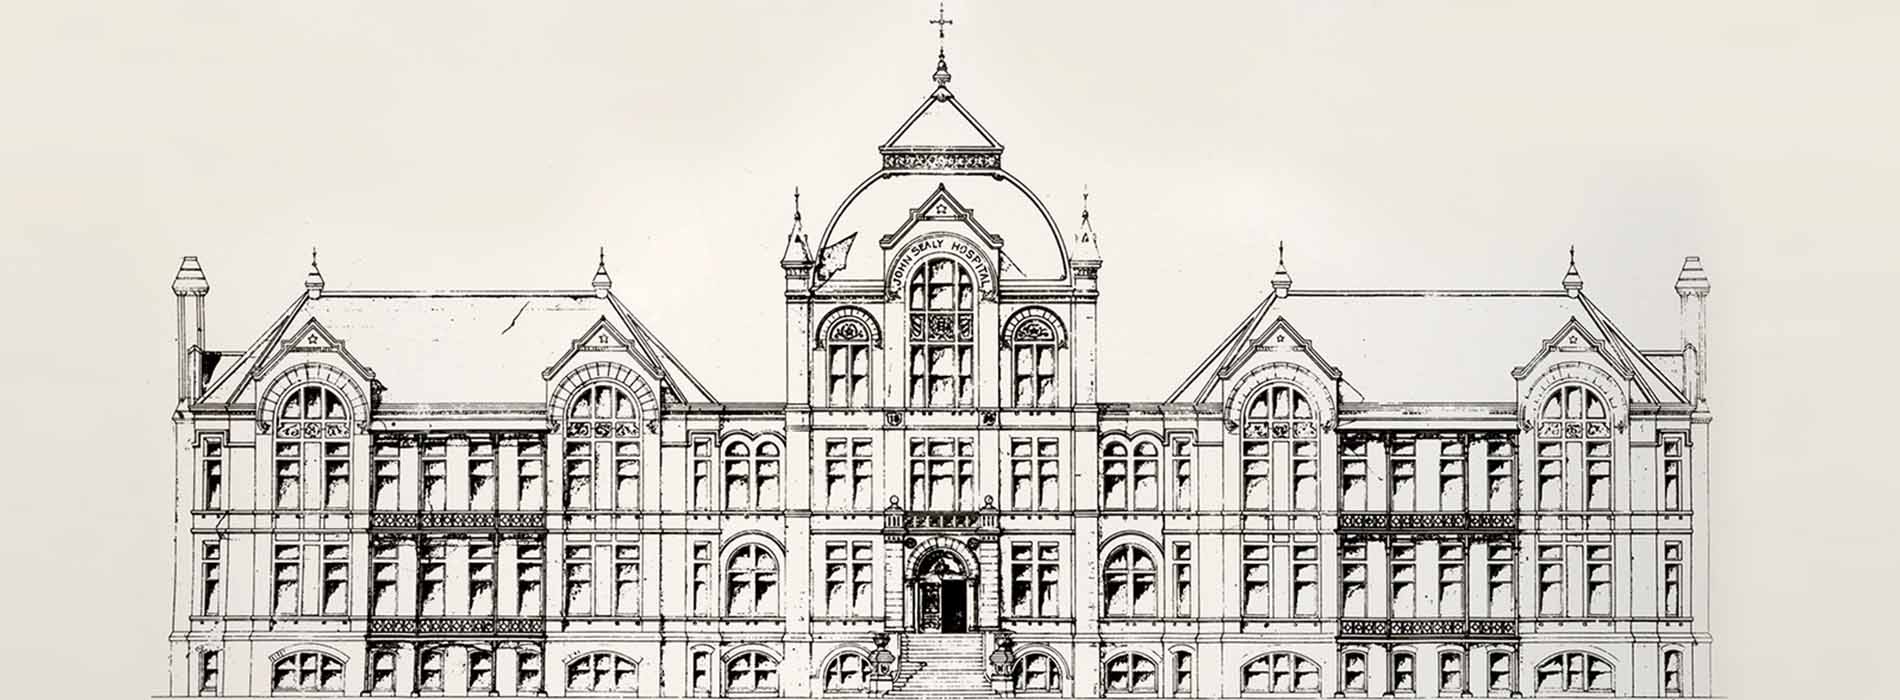 architectural drawing of John Sealy building